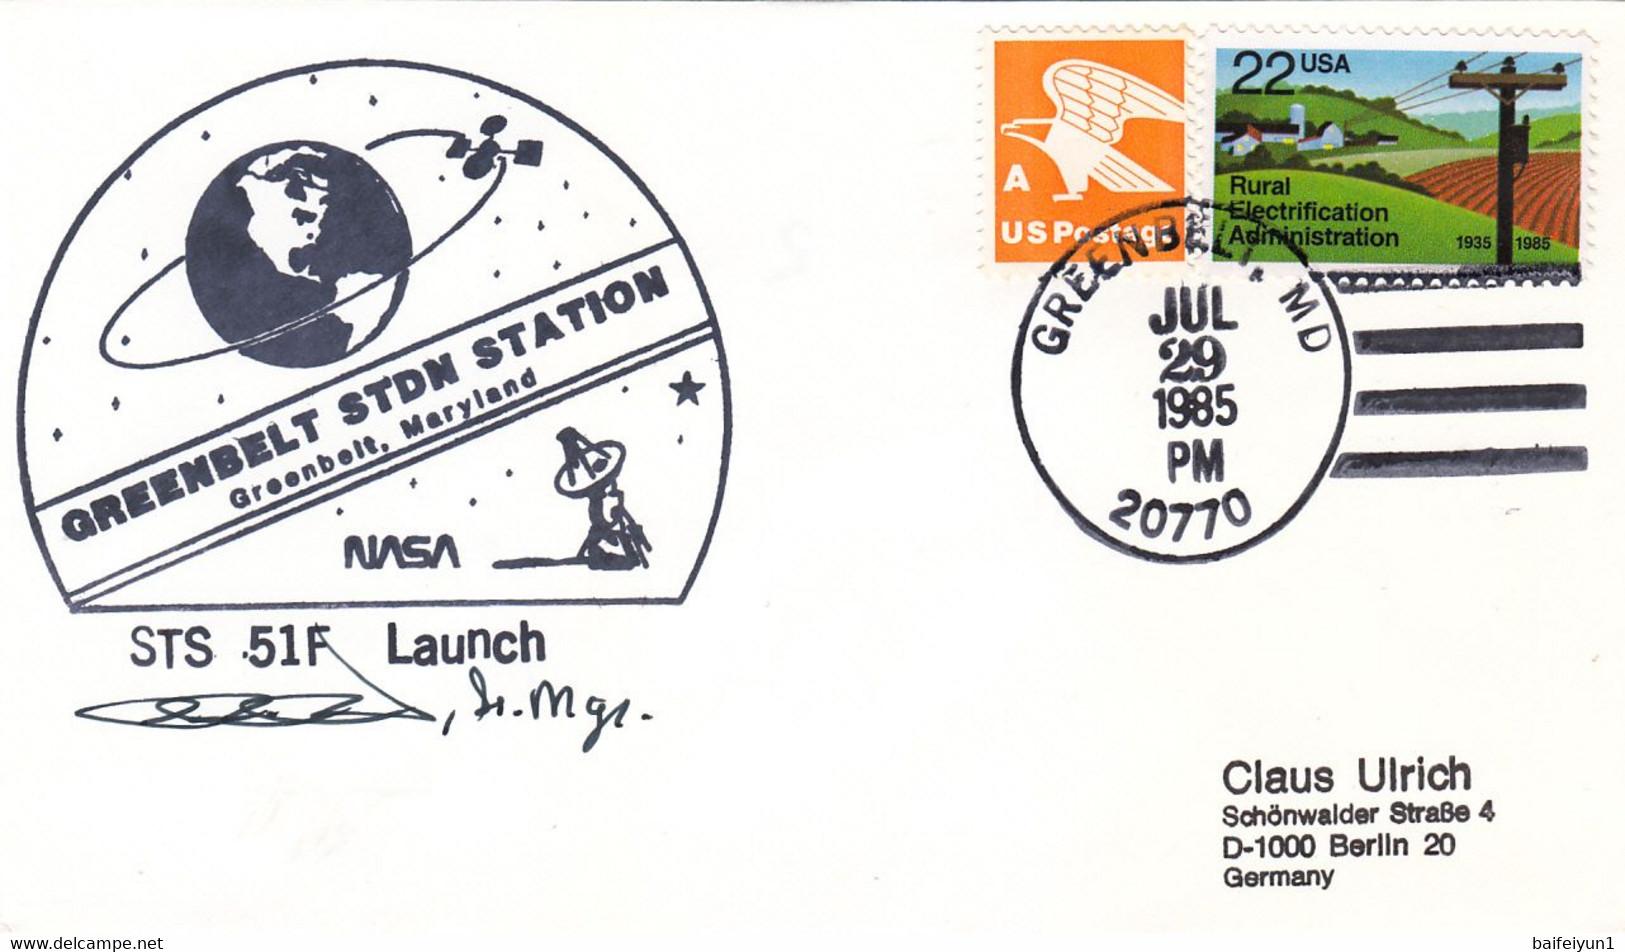 1985 USA  Space Shuttle Challenger STS-51F Mission And Greenbelt STDN STATION Commemorative Cover - Amérique Du Nord